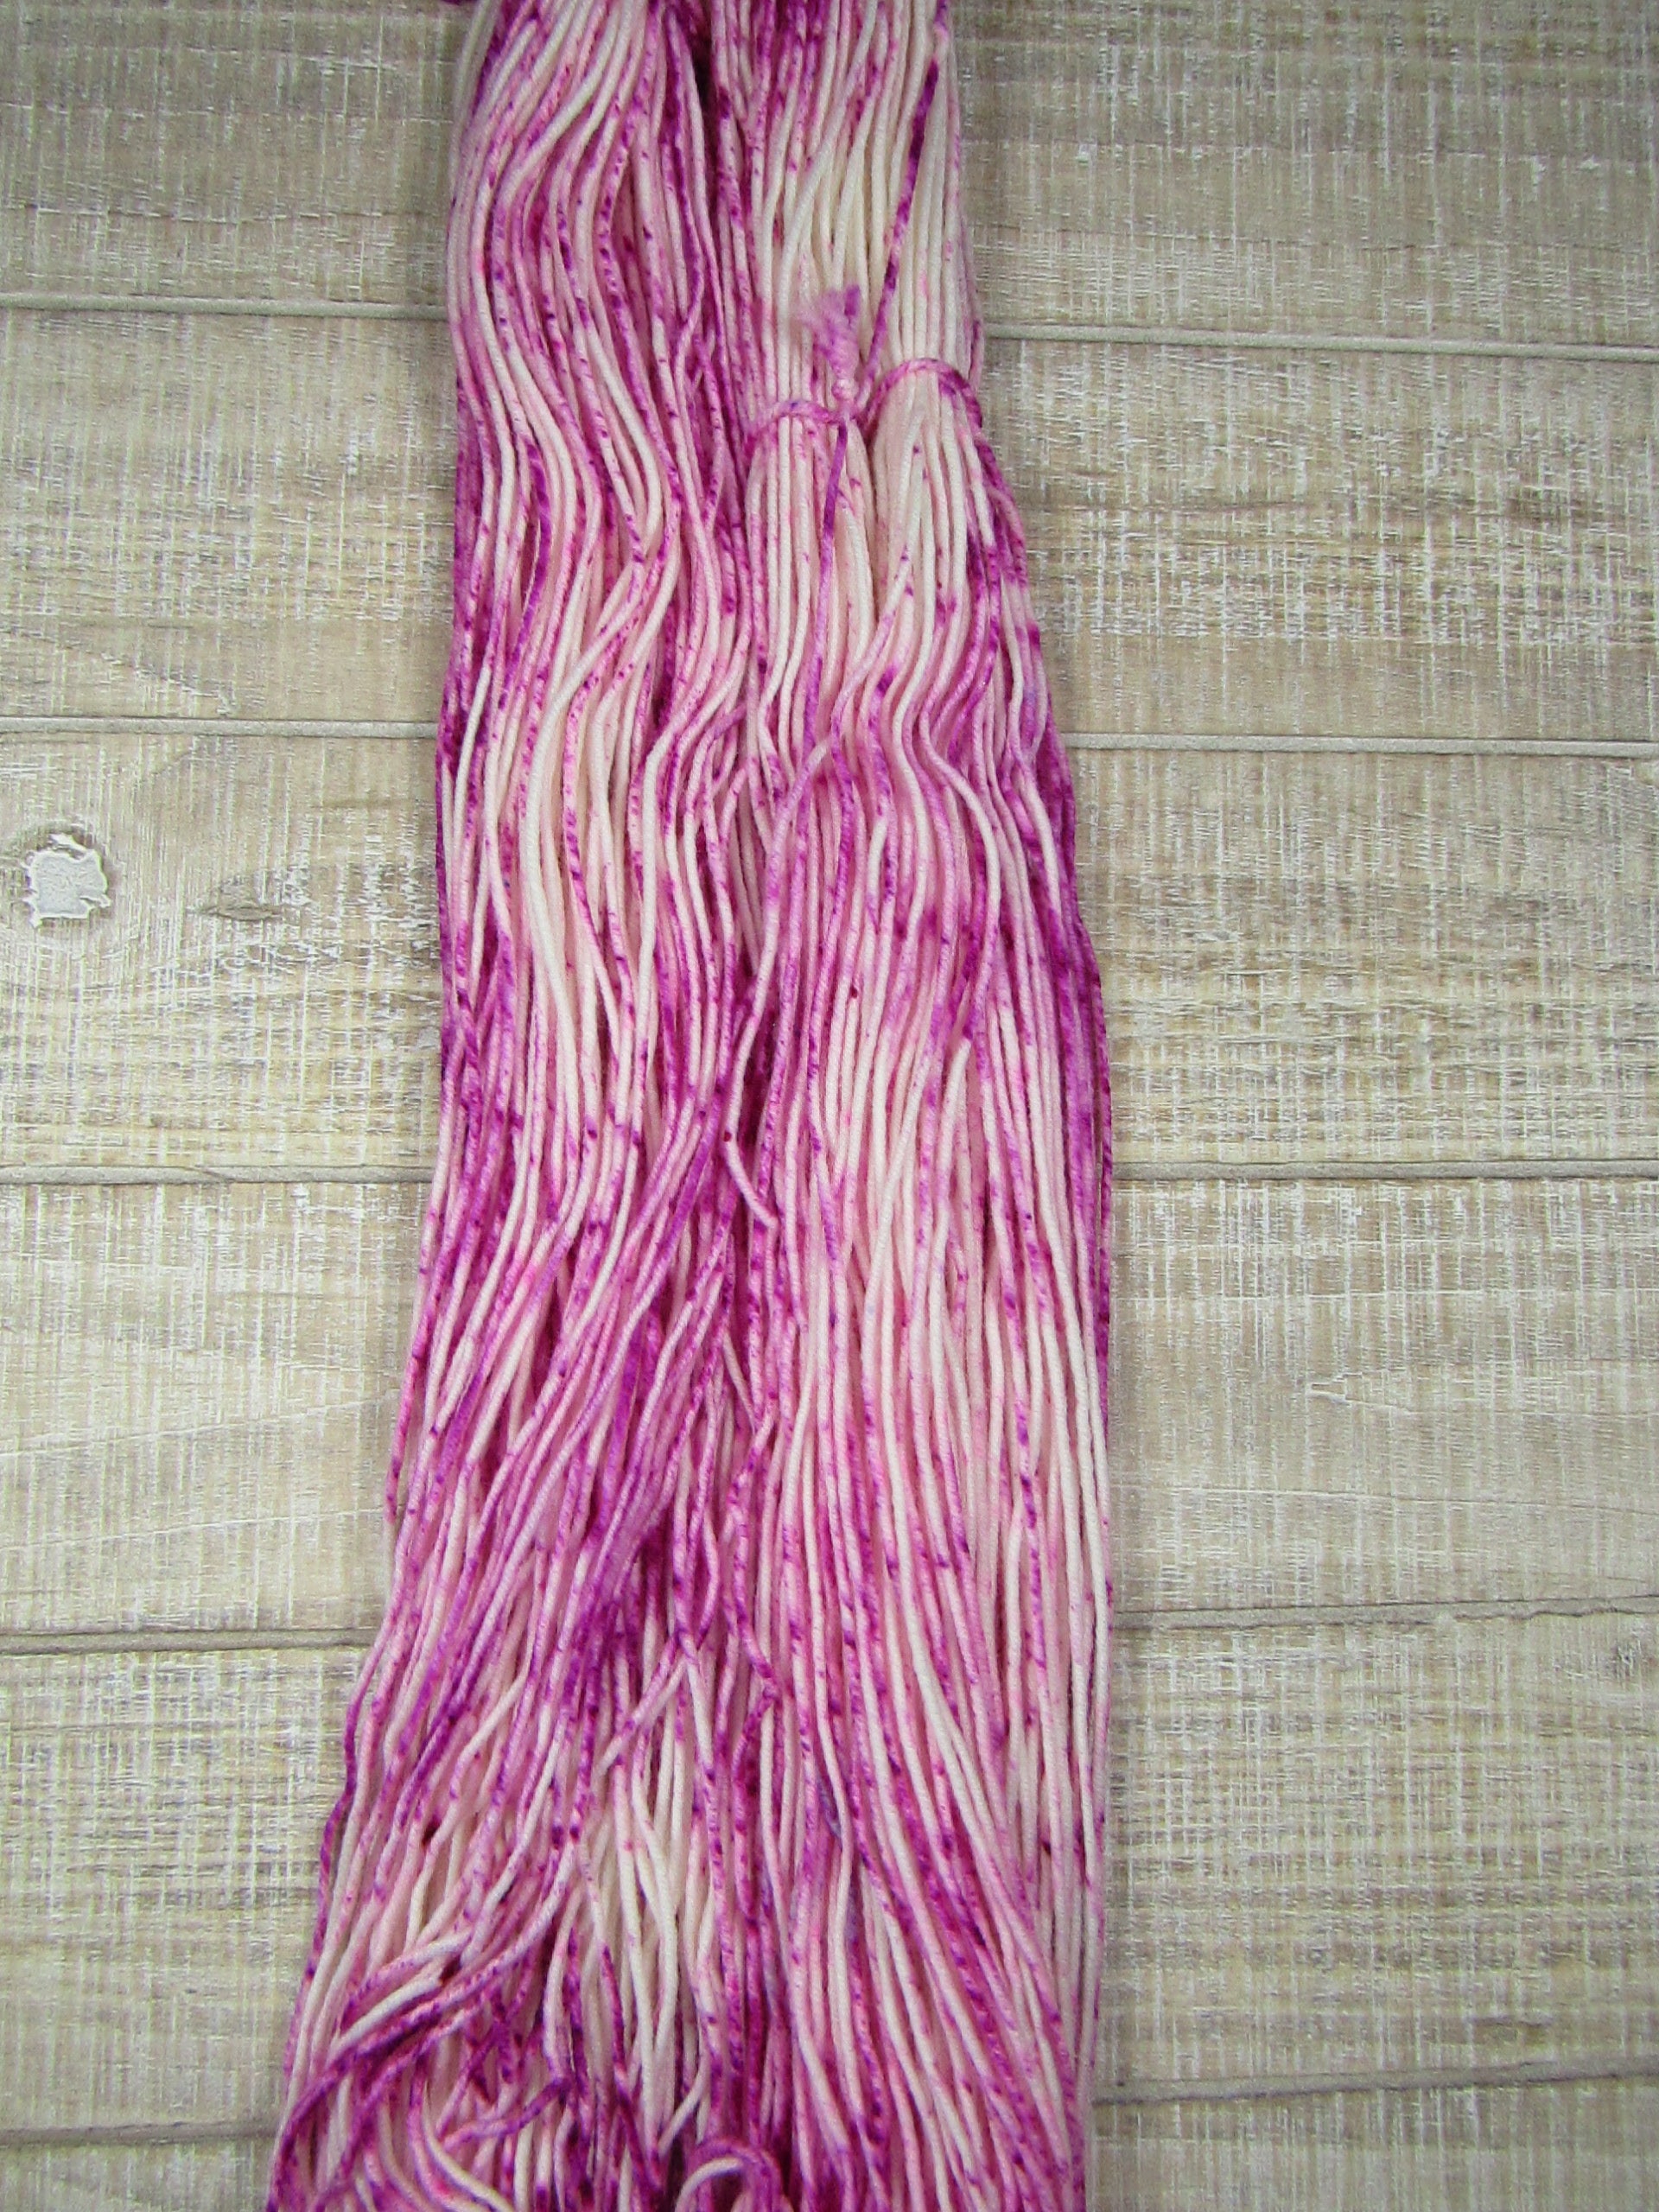 Hand-dyed yarn with pink speckles - Rachel Merino/Cashstyle Nylon Worsted Weight